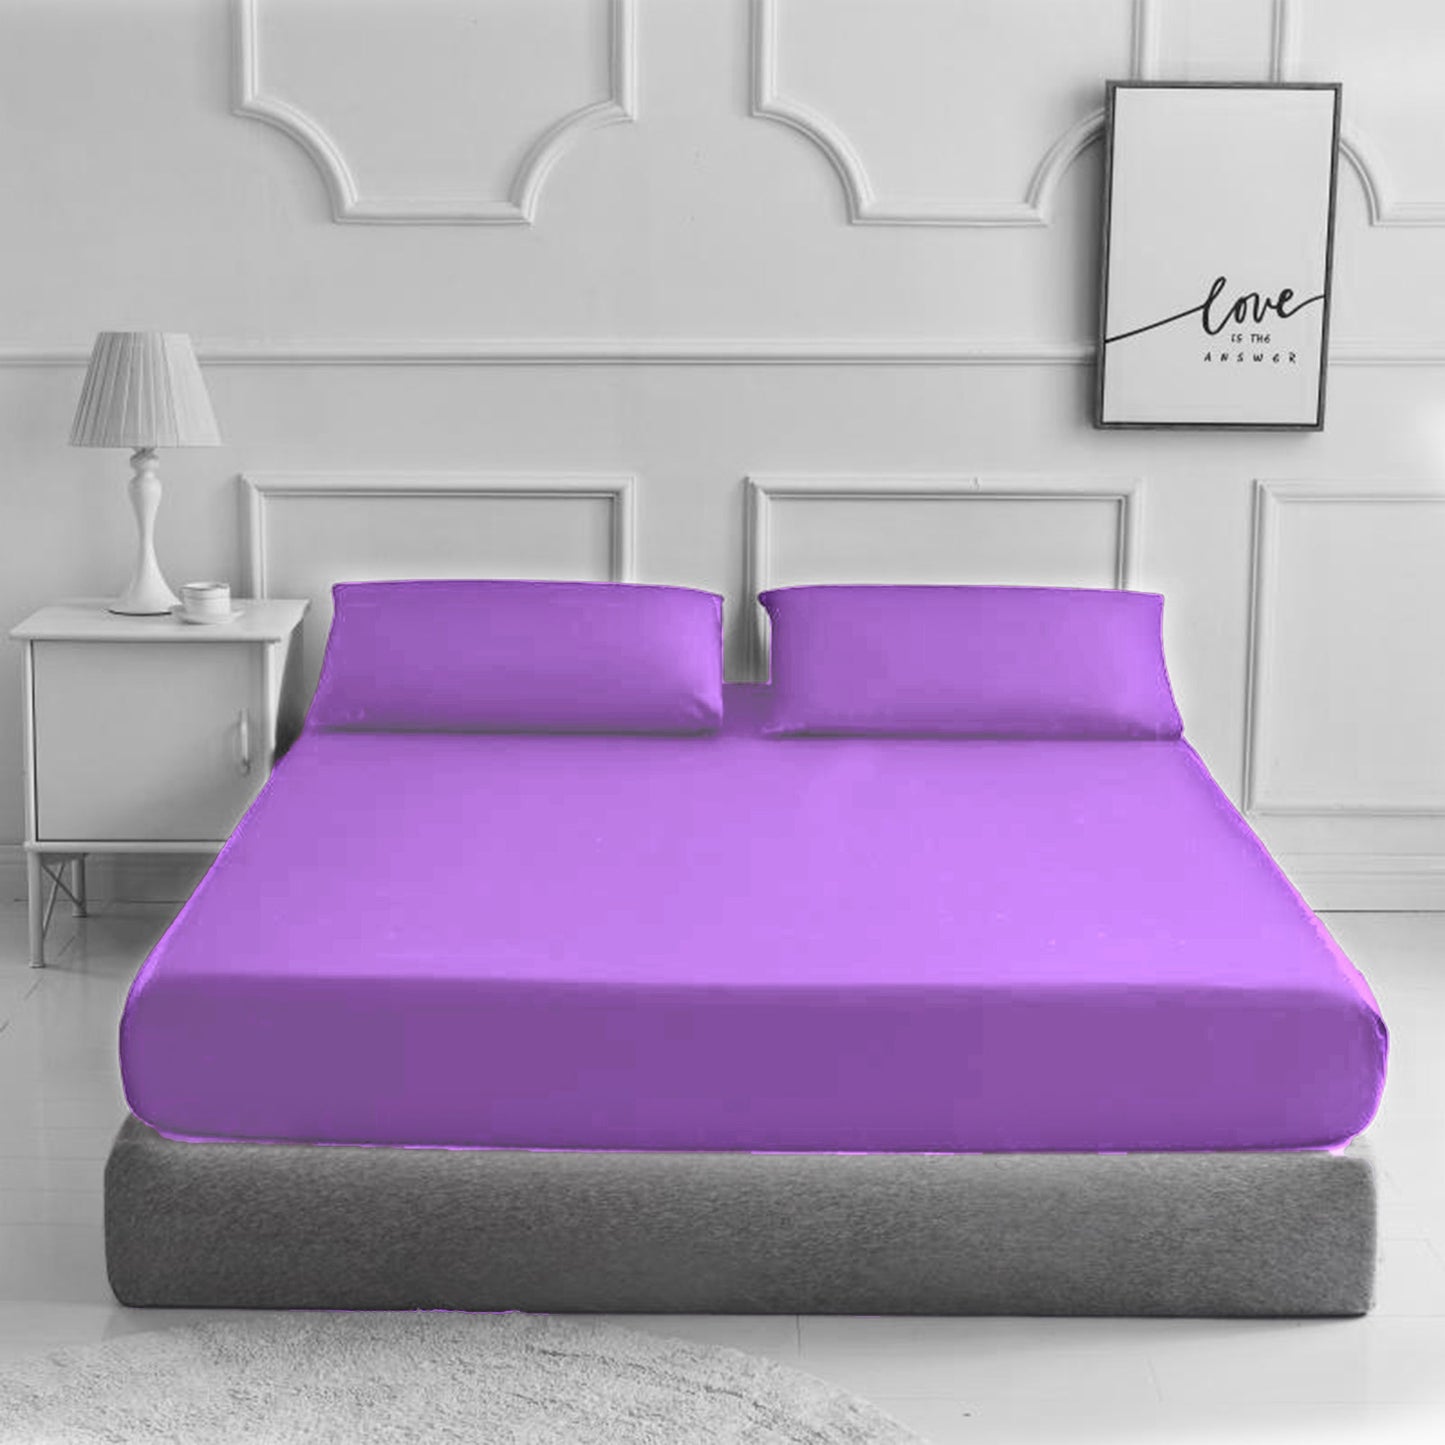 Fitted Bed Sheet Matching FREE 2 X PILLOW CASE Plain Dyed - TheComfortshop.co.ukBed Sheets0721718963653thecomfortshopTheComfortshop.co.ukPC FIT FREE PP Lilac KingLilacKingFitted Bed Sheet Matching FREE 2 X PILLOW CASE Plain Dyed - TheComfortshop.co.uk